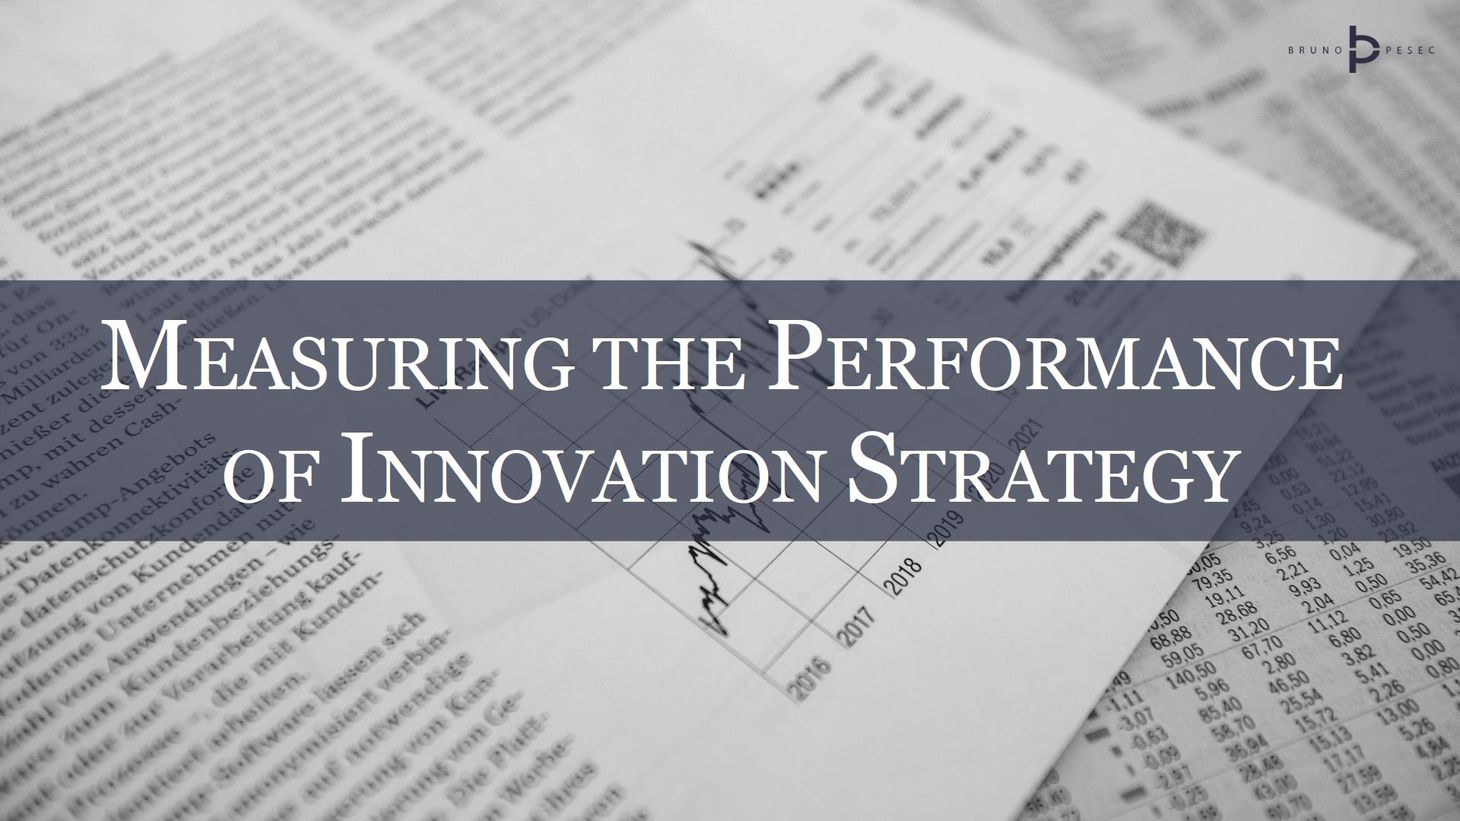 Measuring the performance of innovation strategy